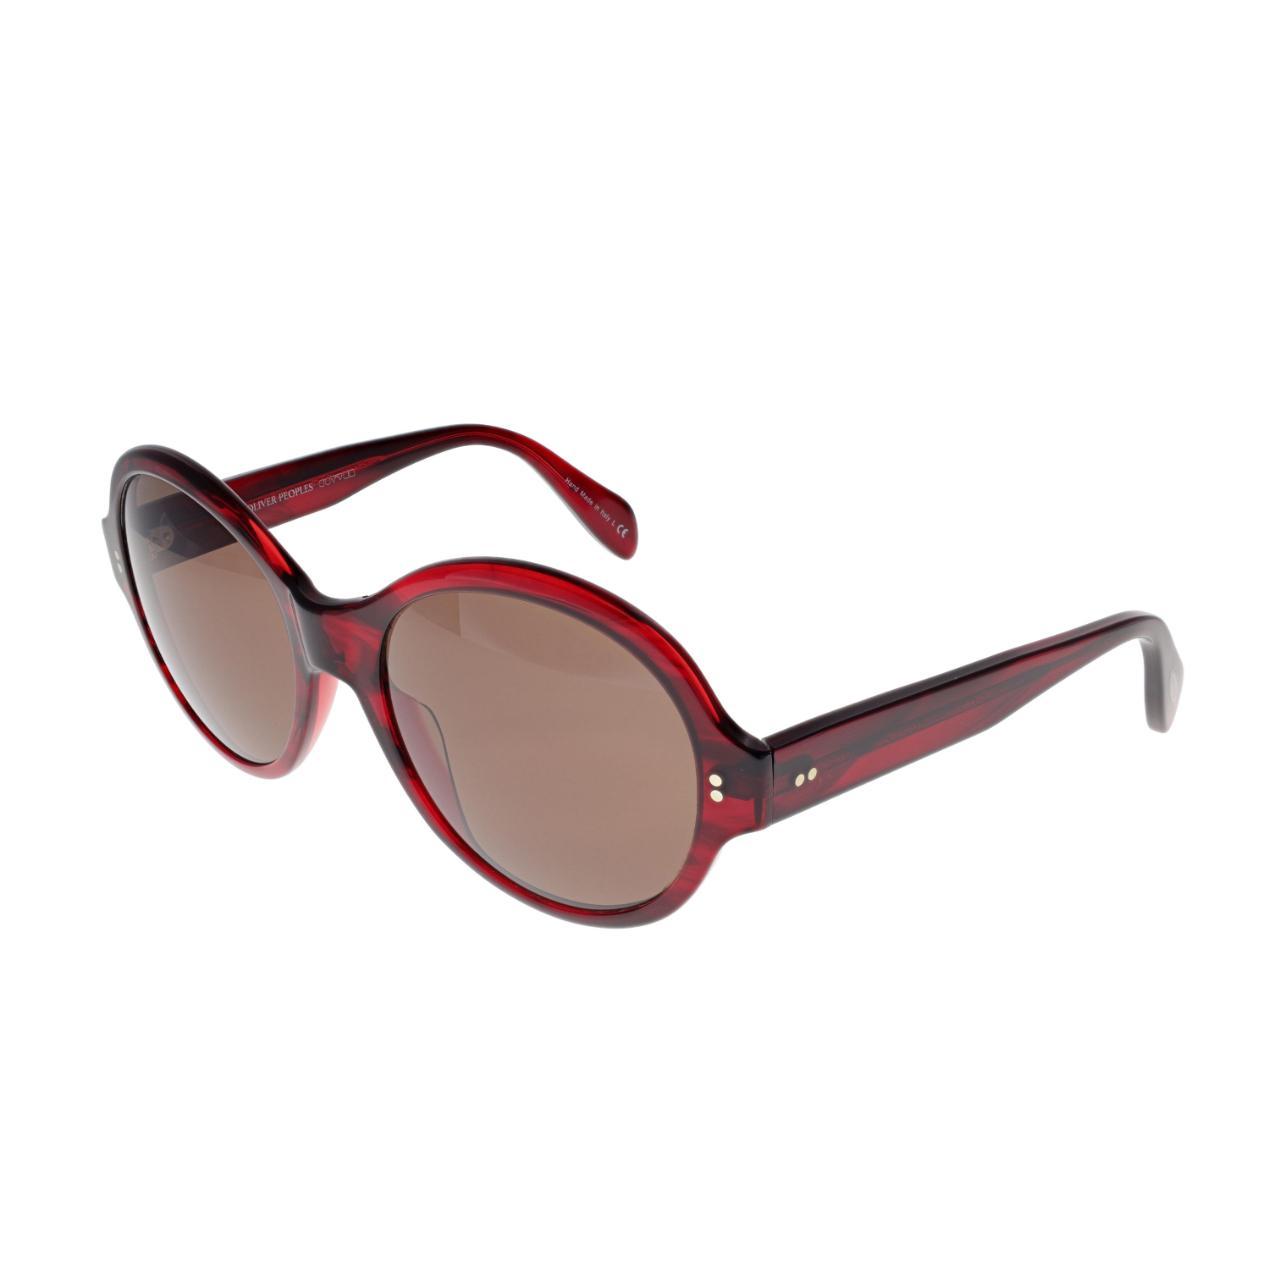 Oliver Peoples Women's Red and Brown Sunglasses